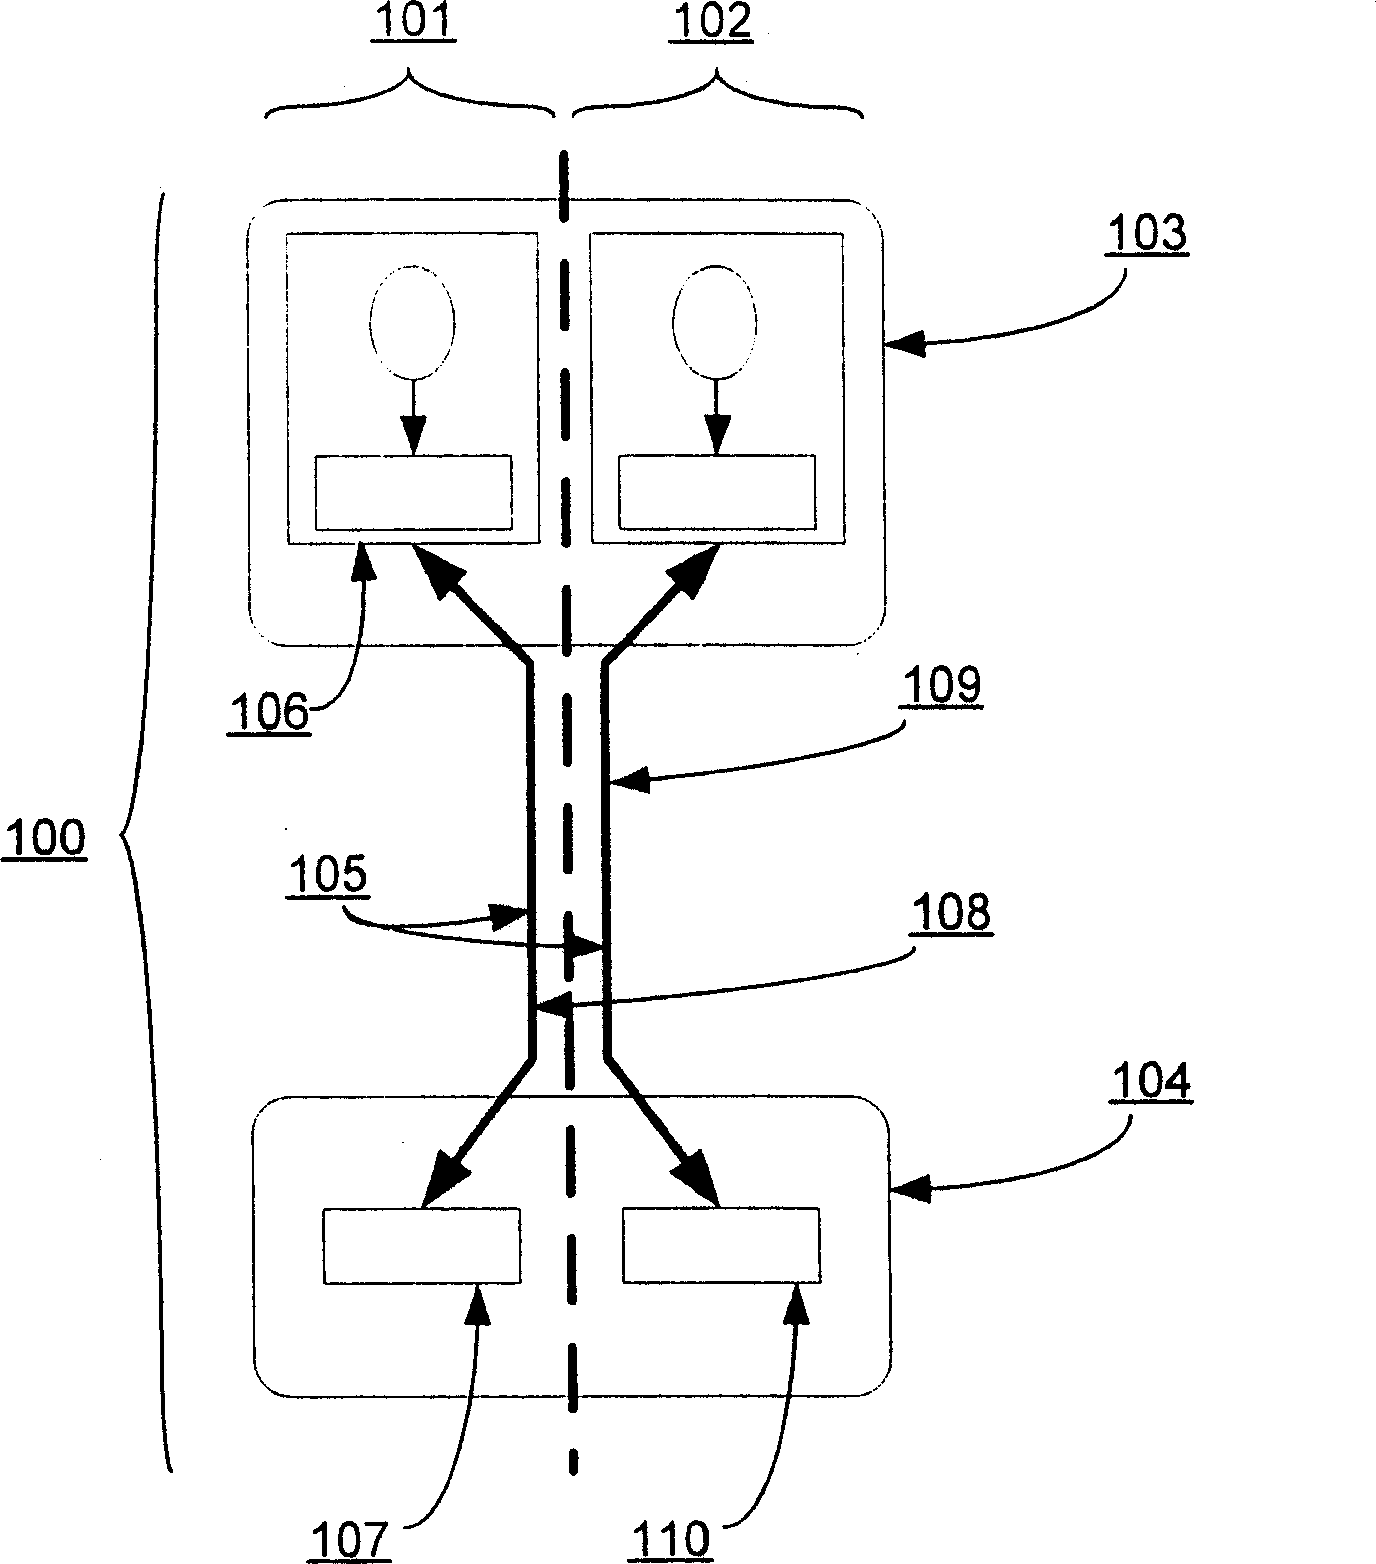 Labeling gateway for compartmented multi-operator network elements over heterogeneous network